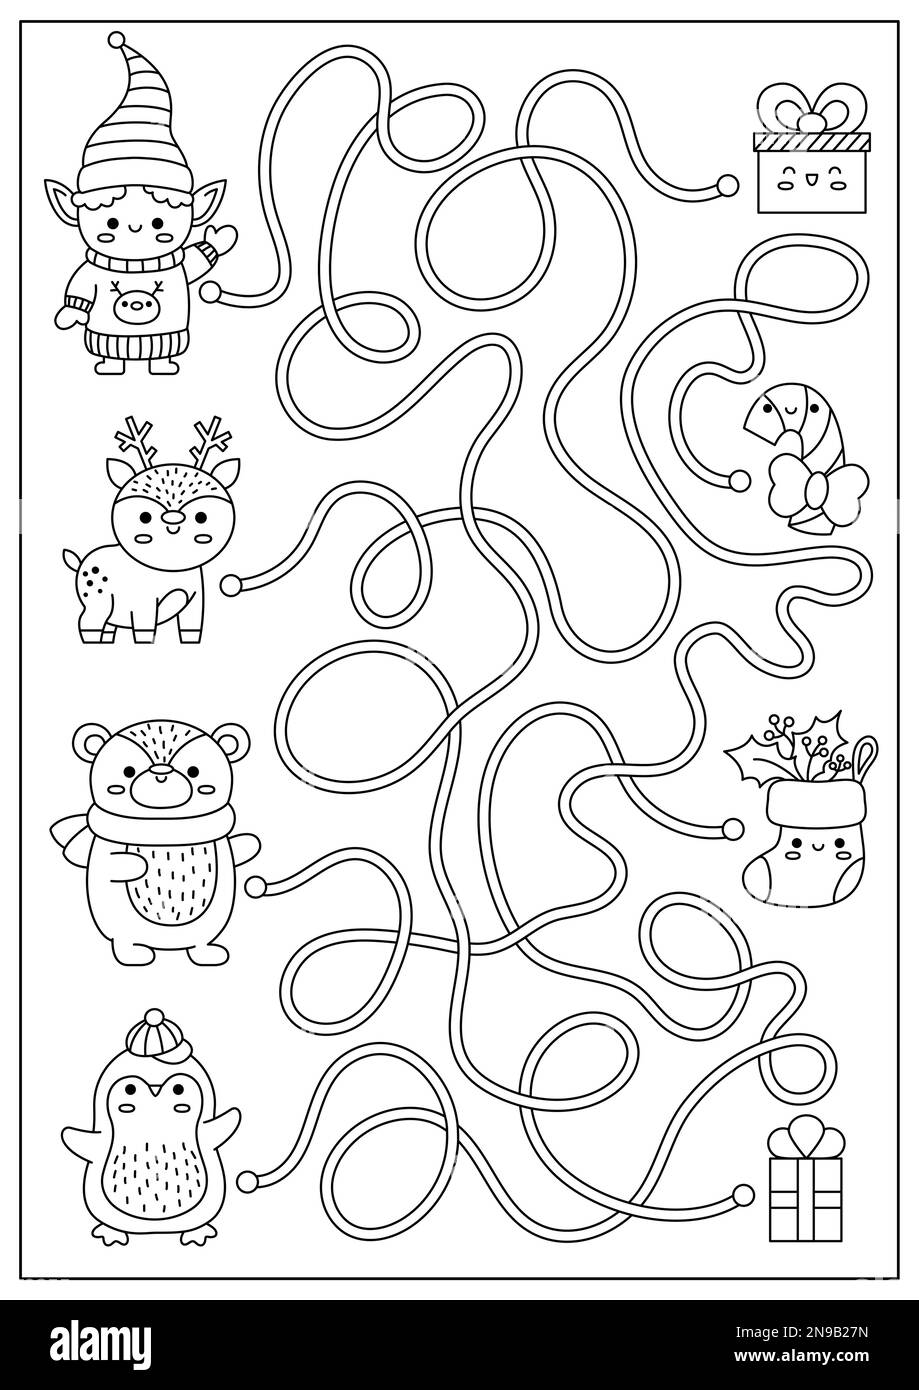 Christmas black and white maze for kids. Winter line holiday preschool printable activity with cute kawaii elf, bear, deer, penguin and presents. New Stock Vector